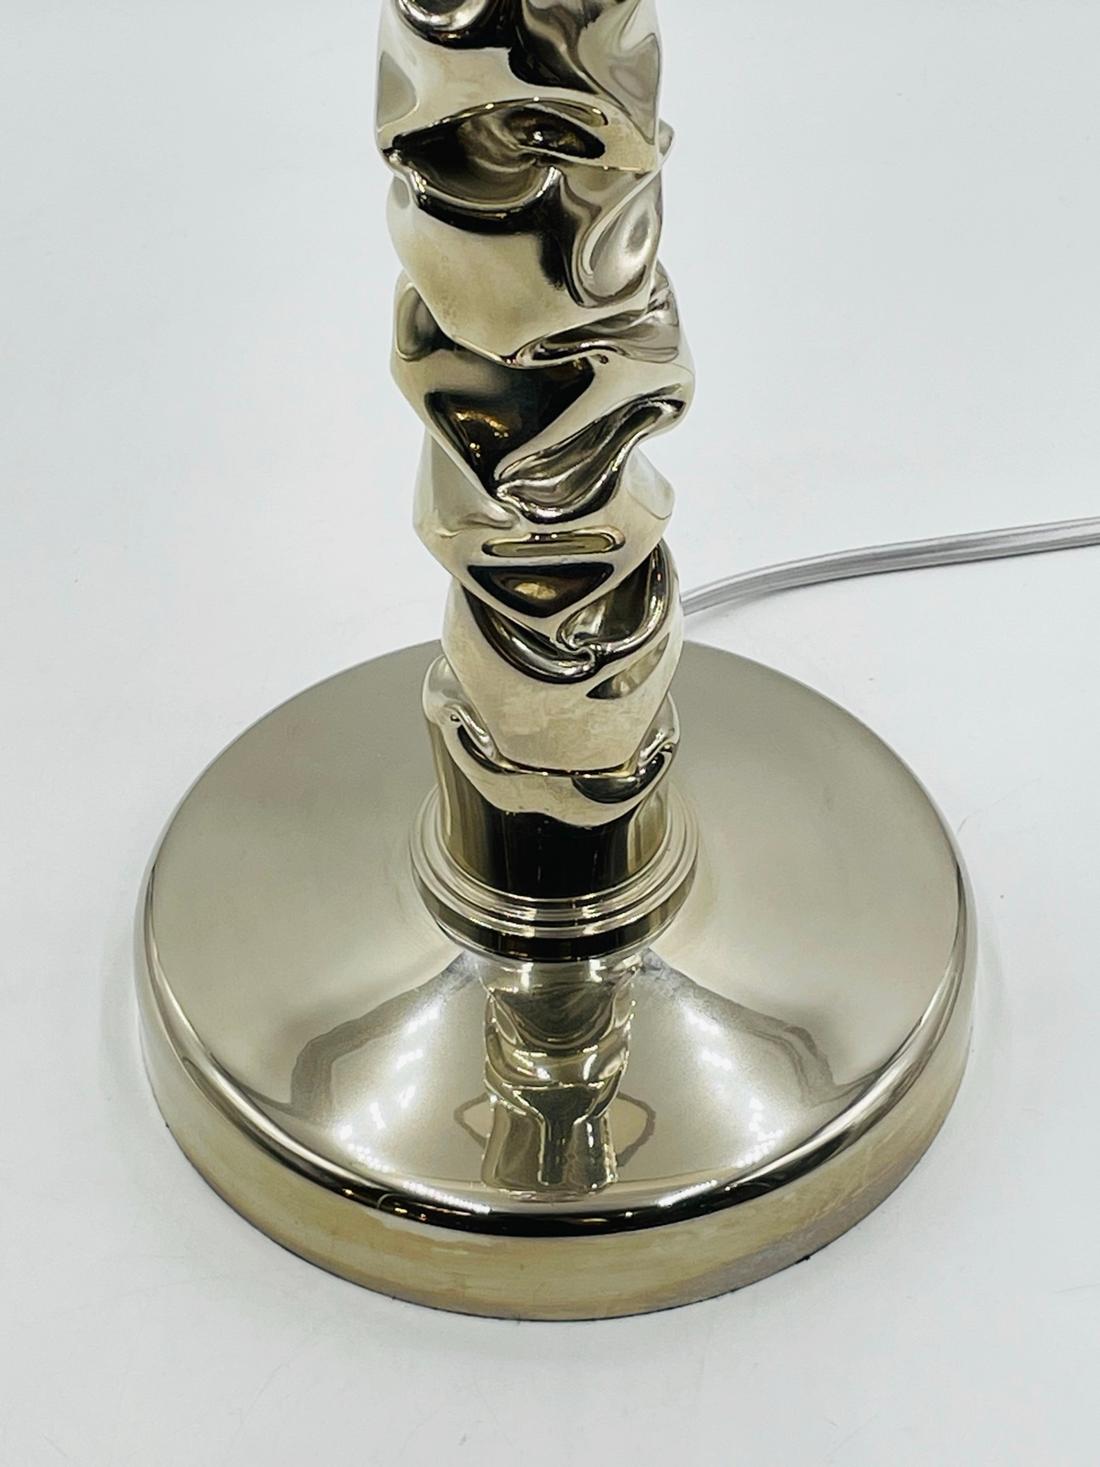 Plated Stunning Table Lamp in Polished Nickel, Made in England by Porta Romana For Sale